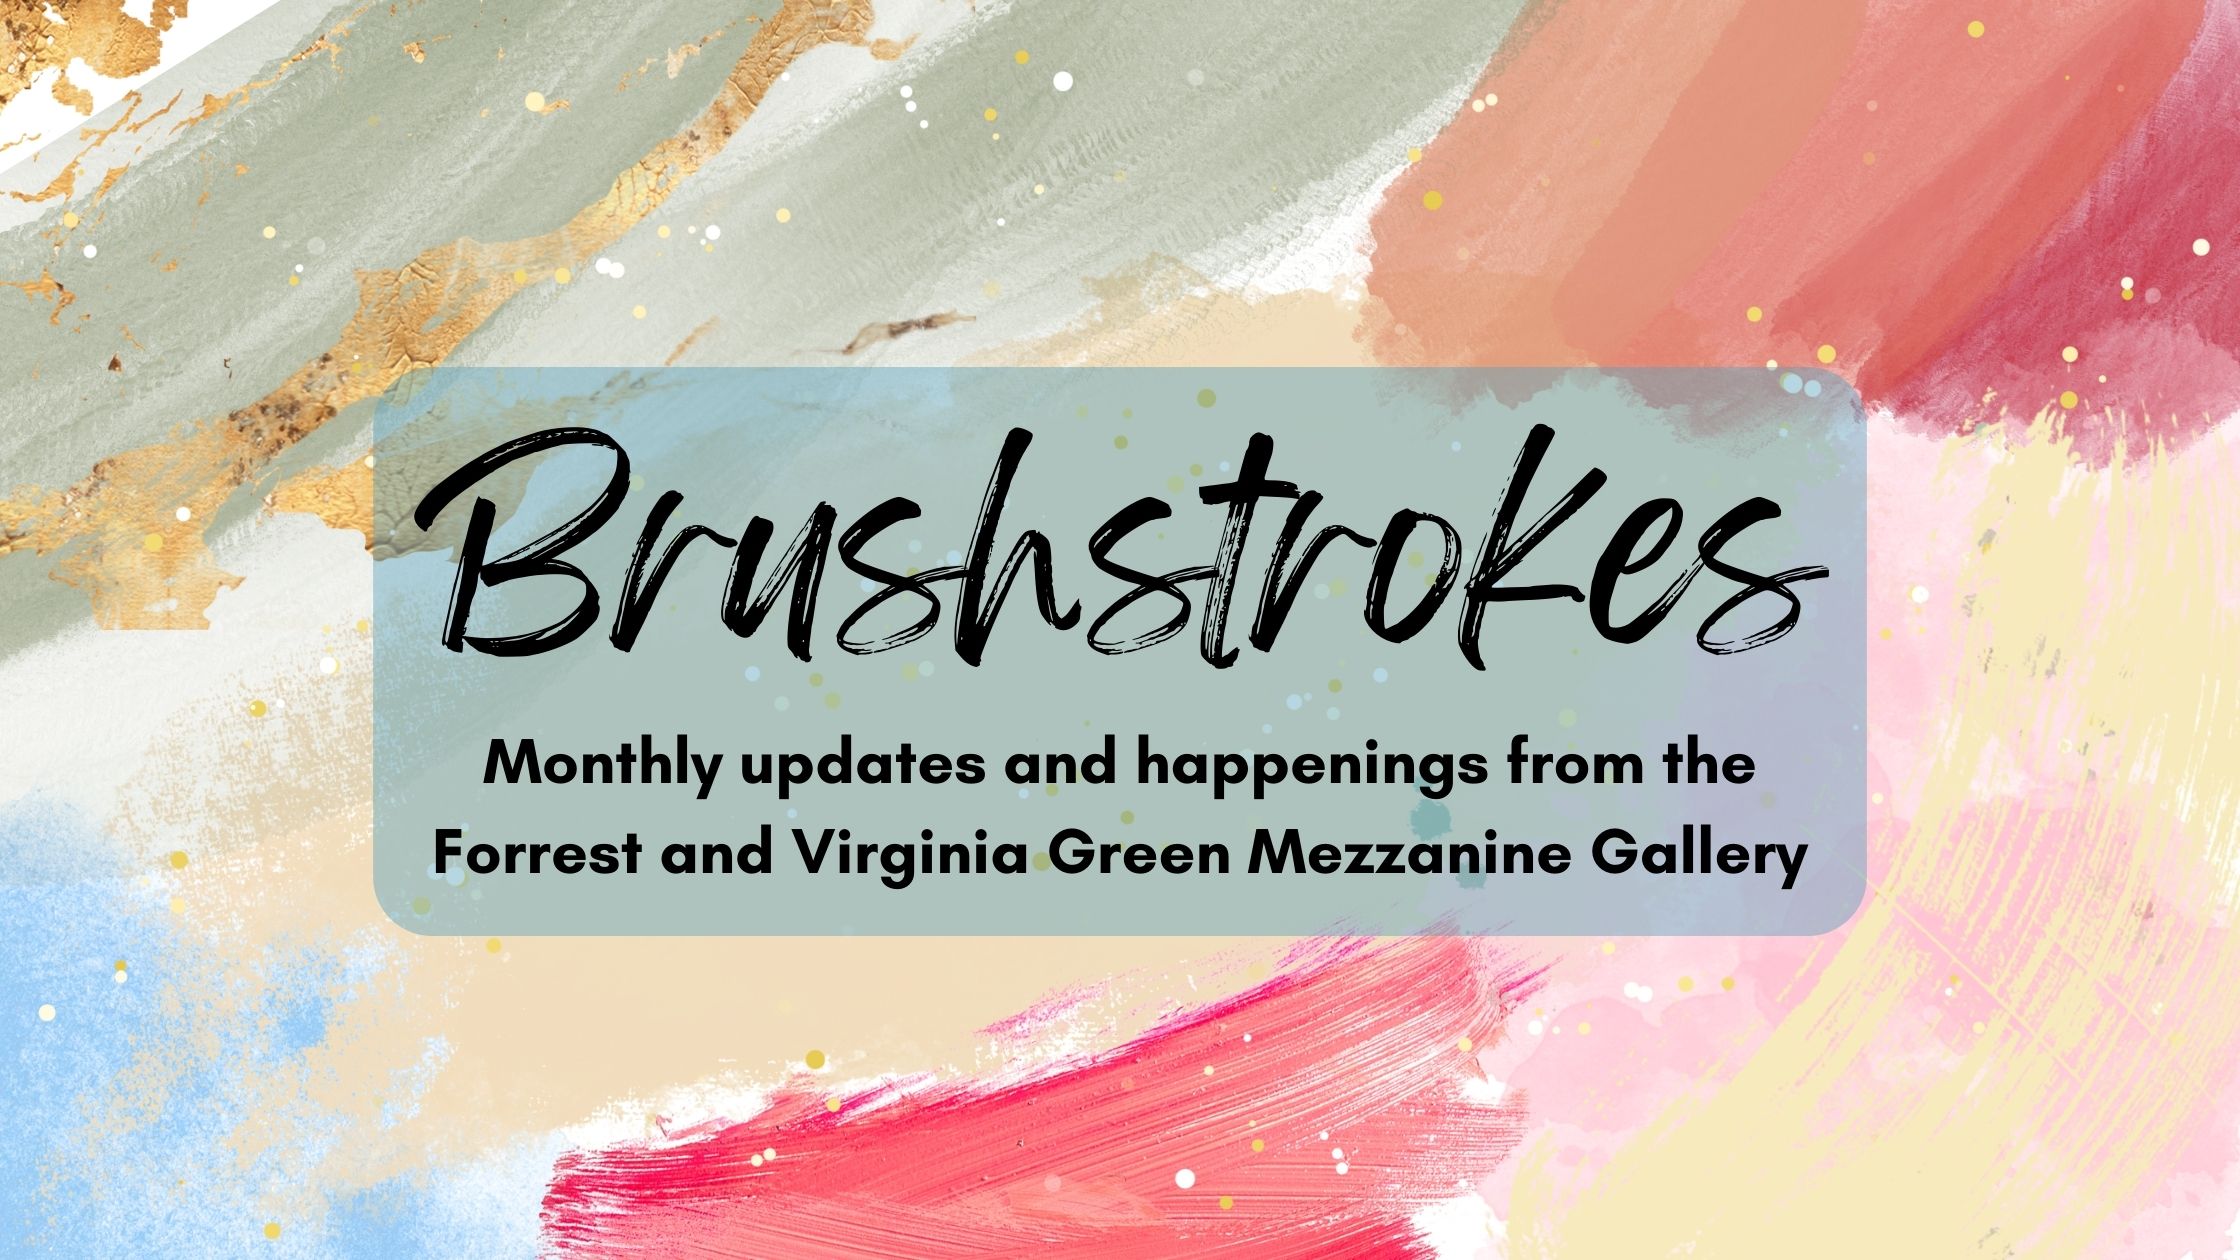 Brushstrokes: Monthly updates and happenings from the Forrest and Virginia Green Mezzanine Gallery